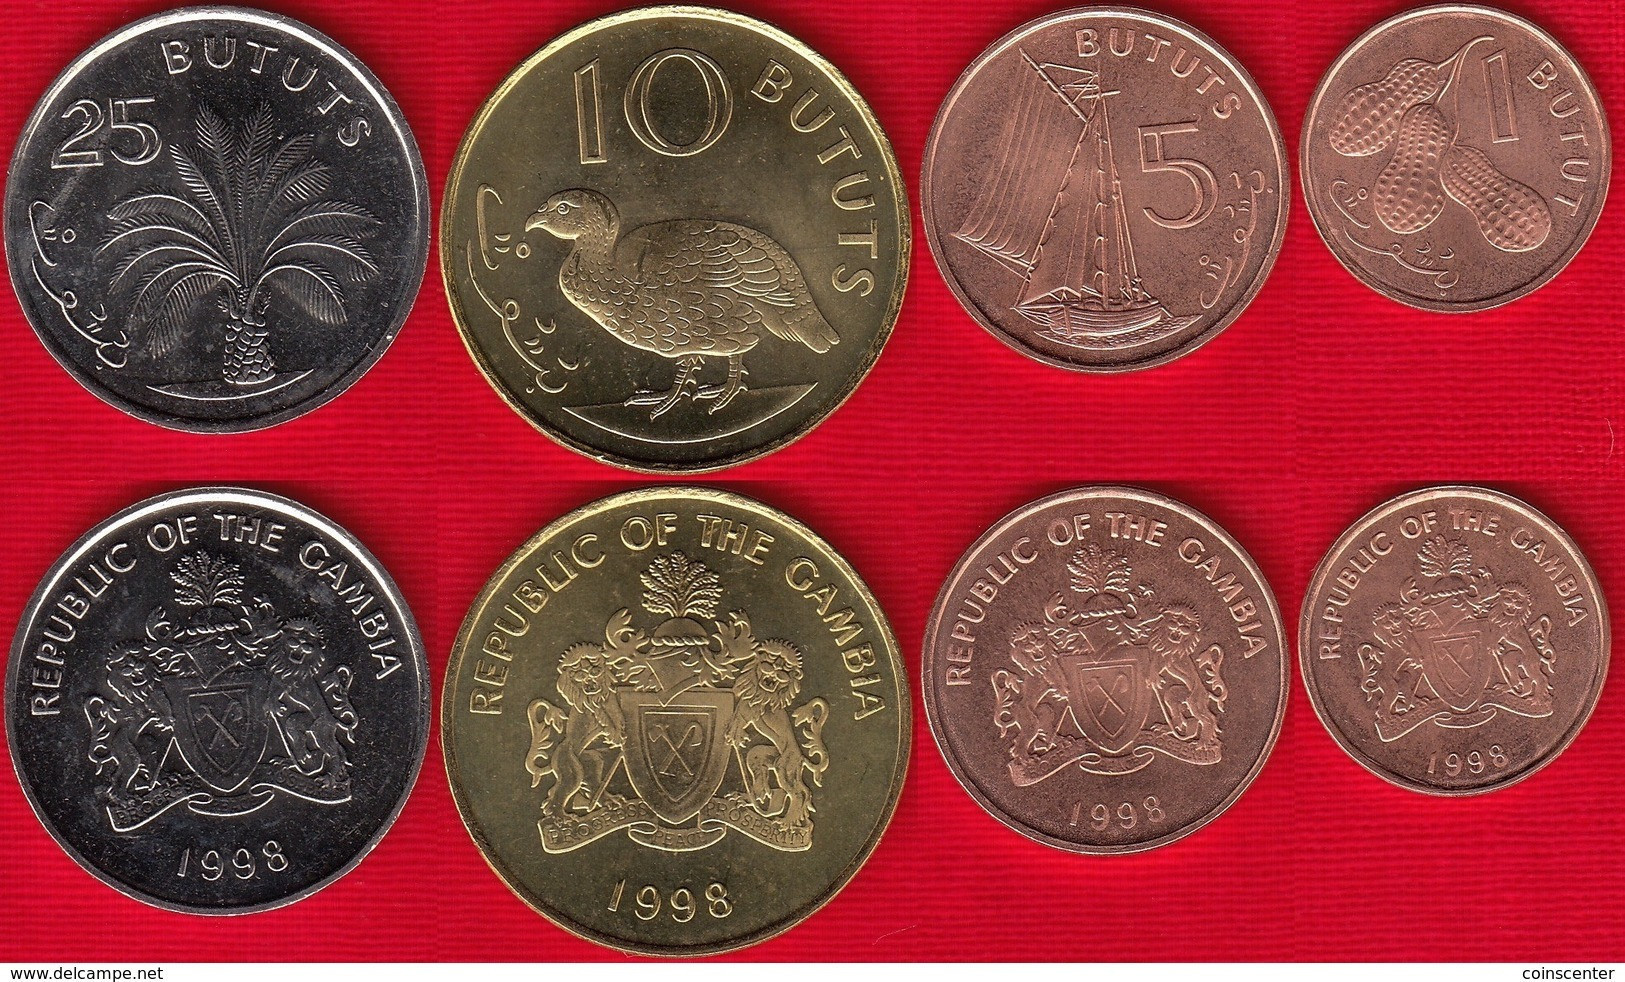 Gambia Set Of 4 Coins: 1 - 25 Bututs 1998 UNC - Gambia